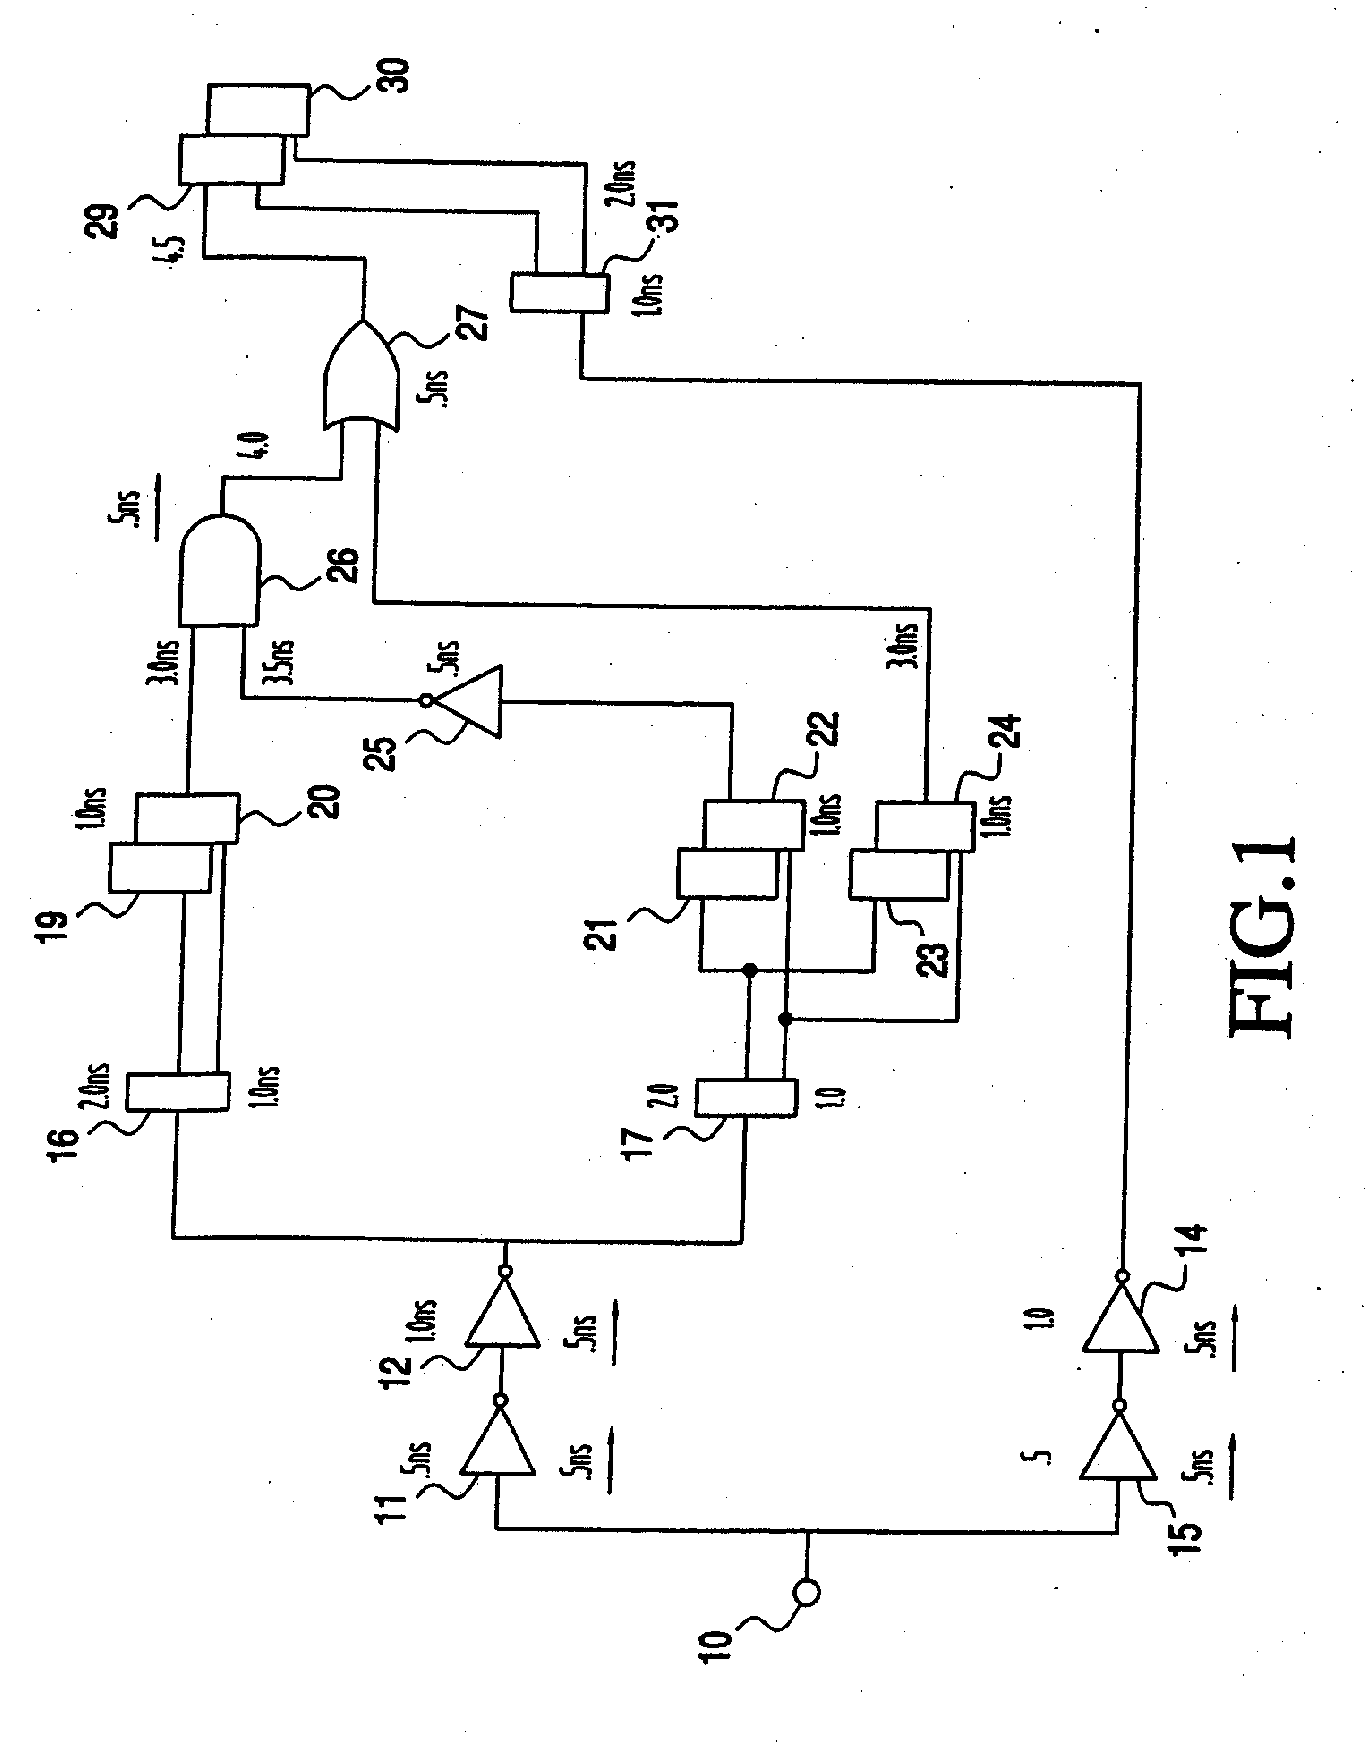 Method for estimating clock jitter for static timing measurements of modeled circuits